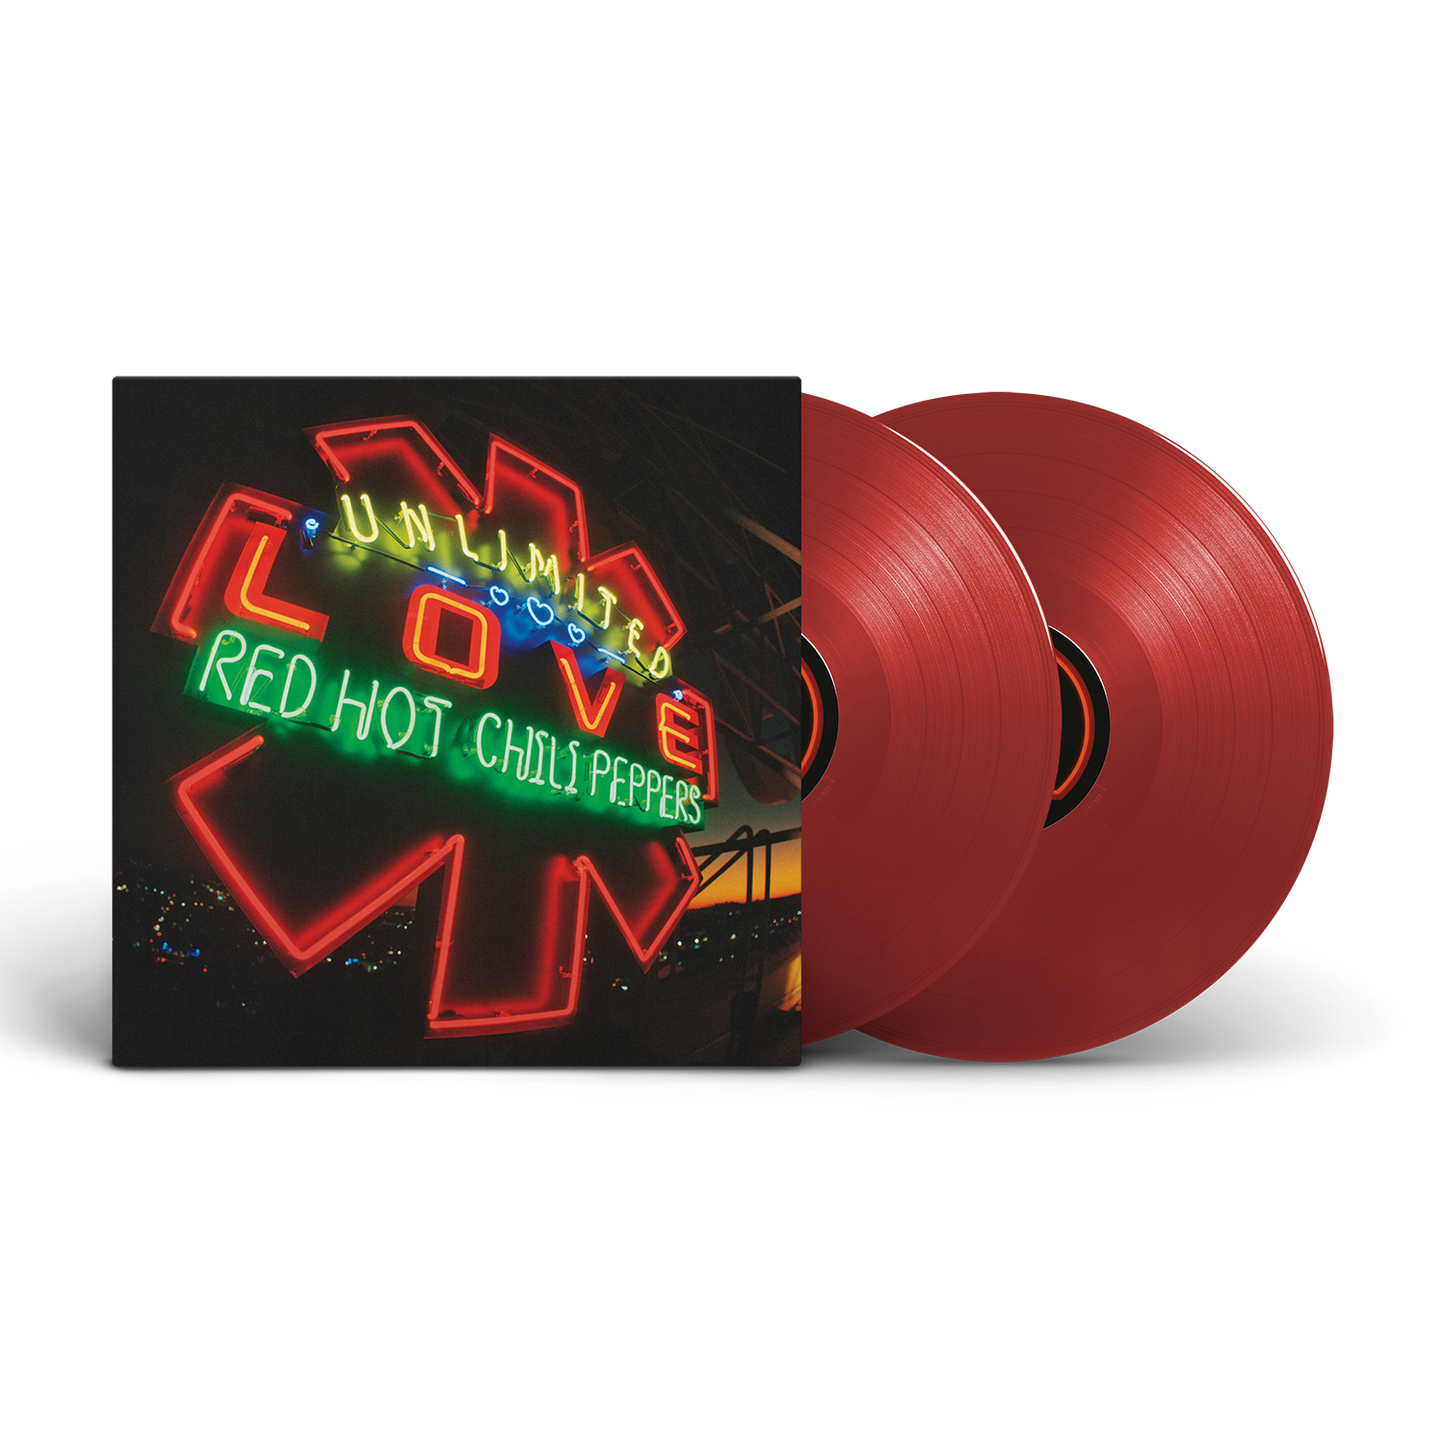 Unlimited Love Store Exclusive Ruby Vinyl